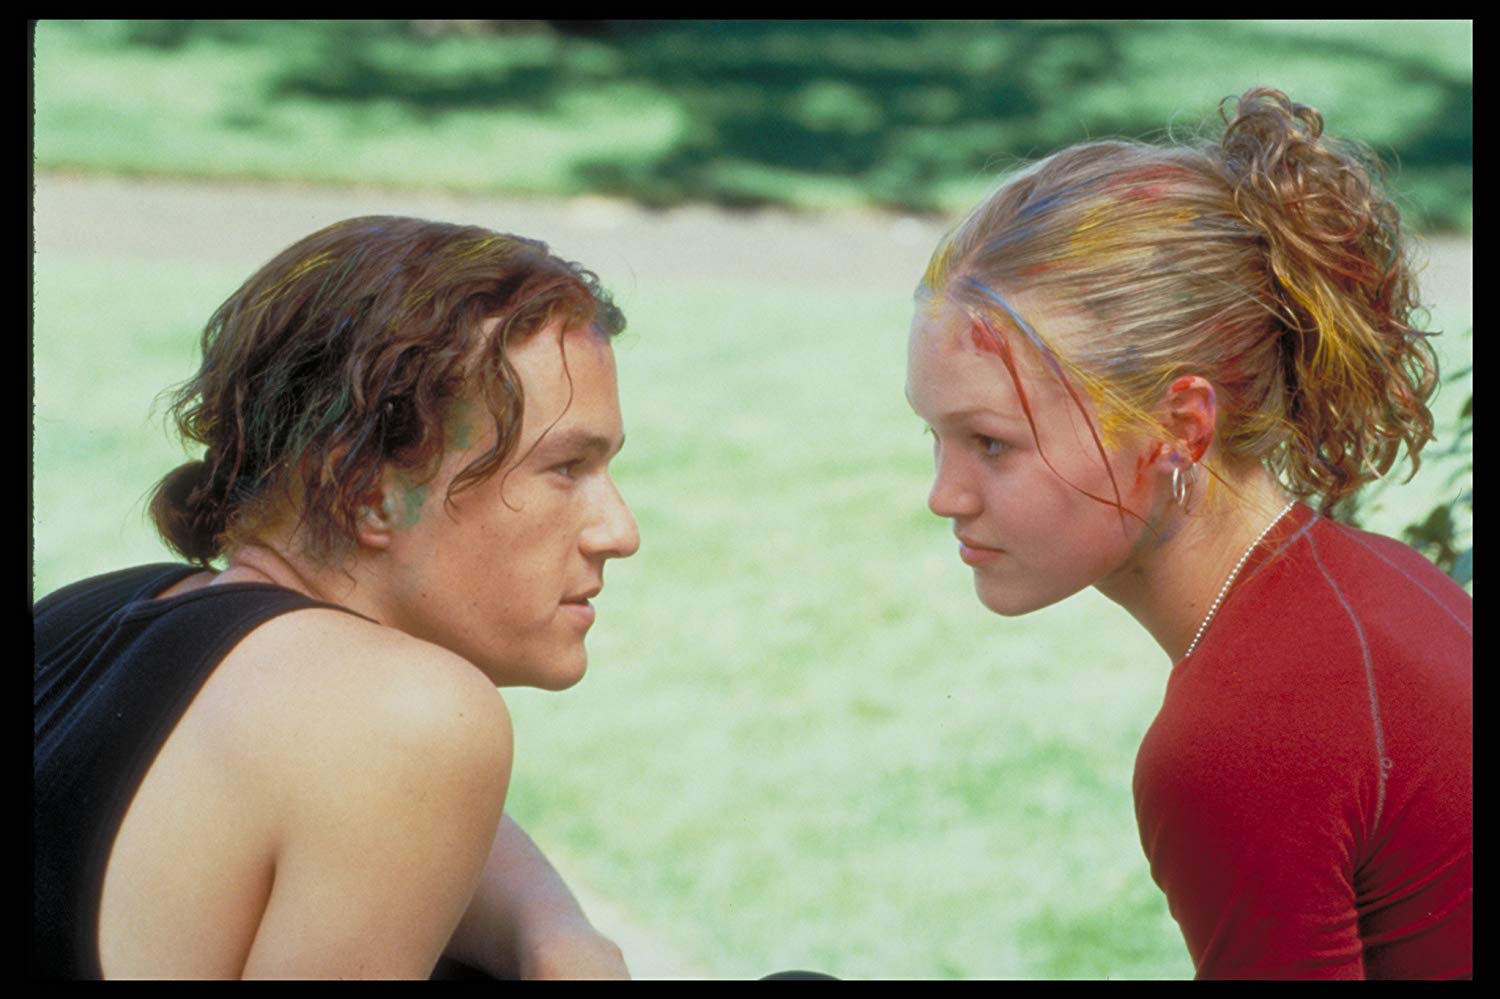 10 things i hate about you film review essay